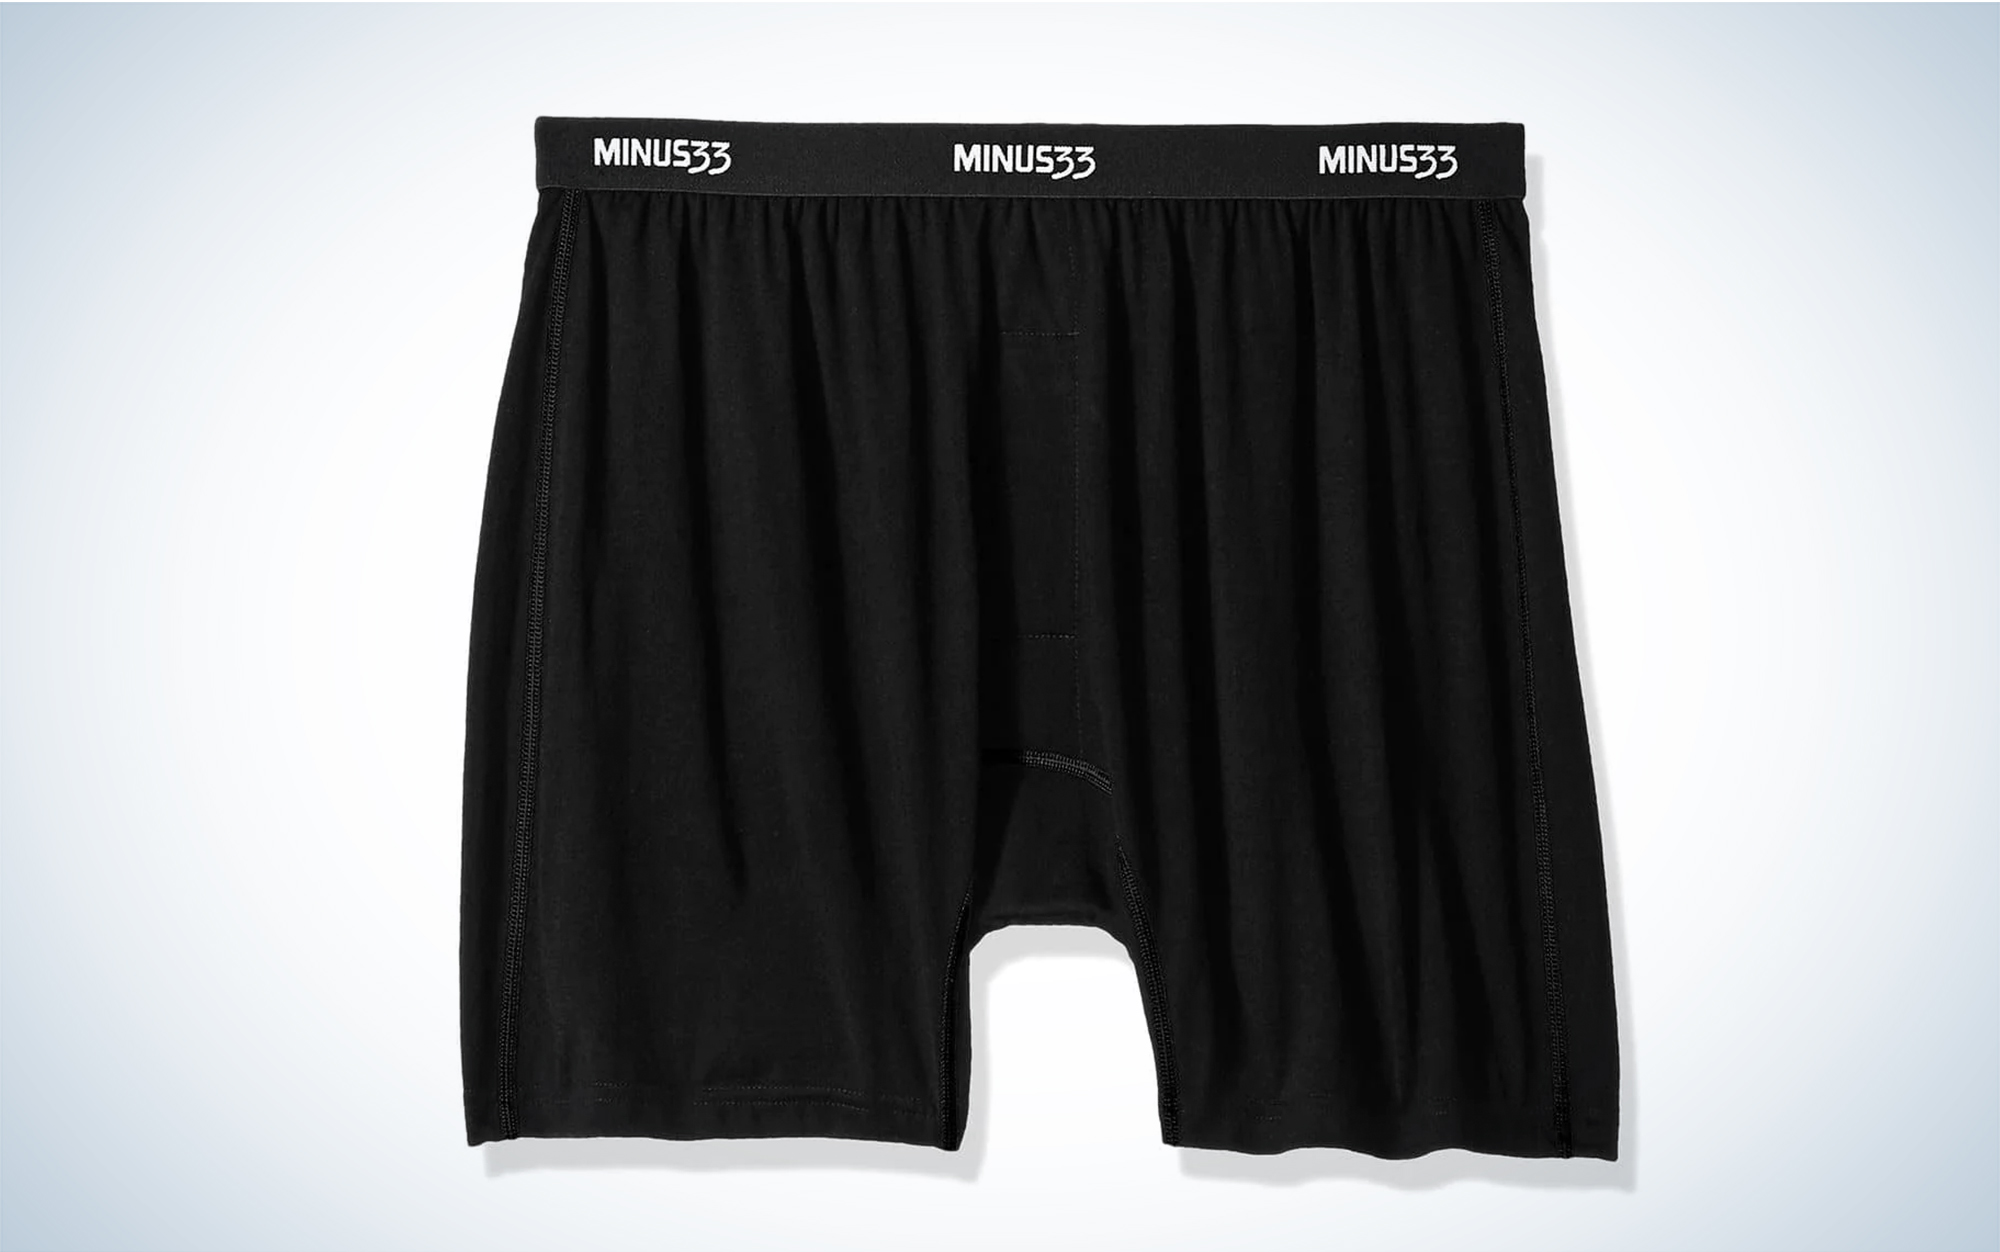 We tested the Minus33 Woolverino Micro Weight Wool Boxer Shorts.